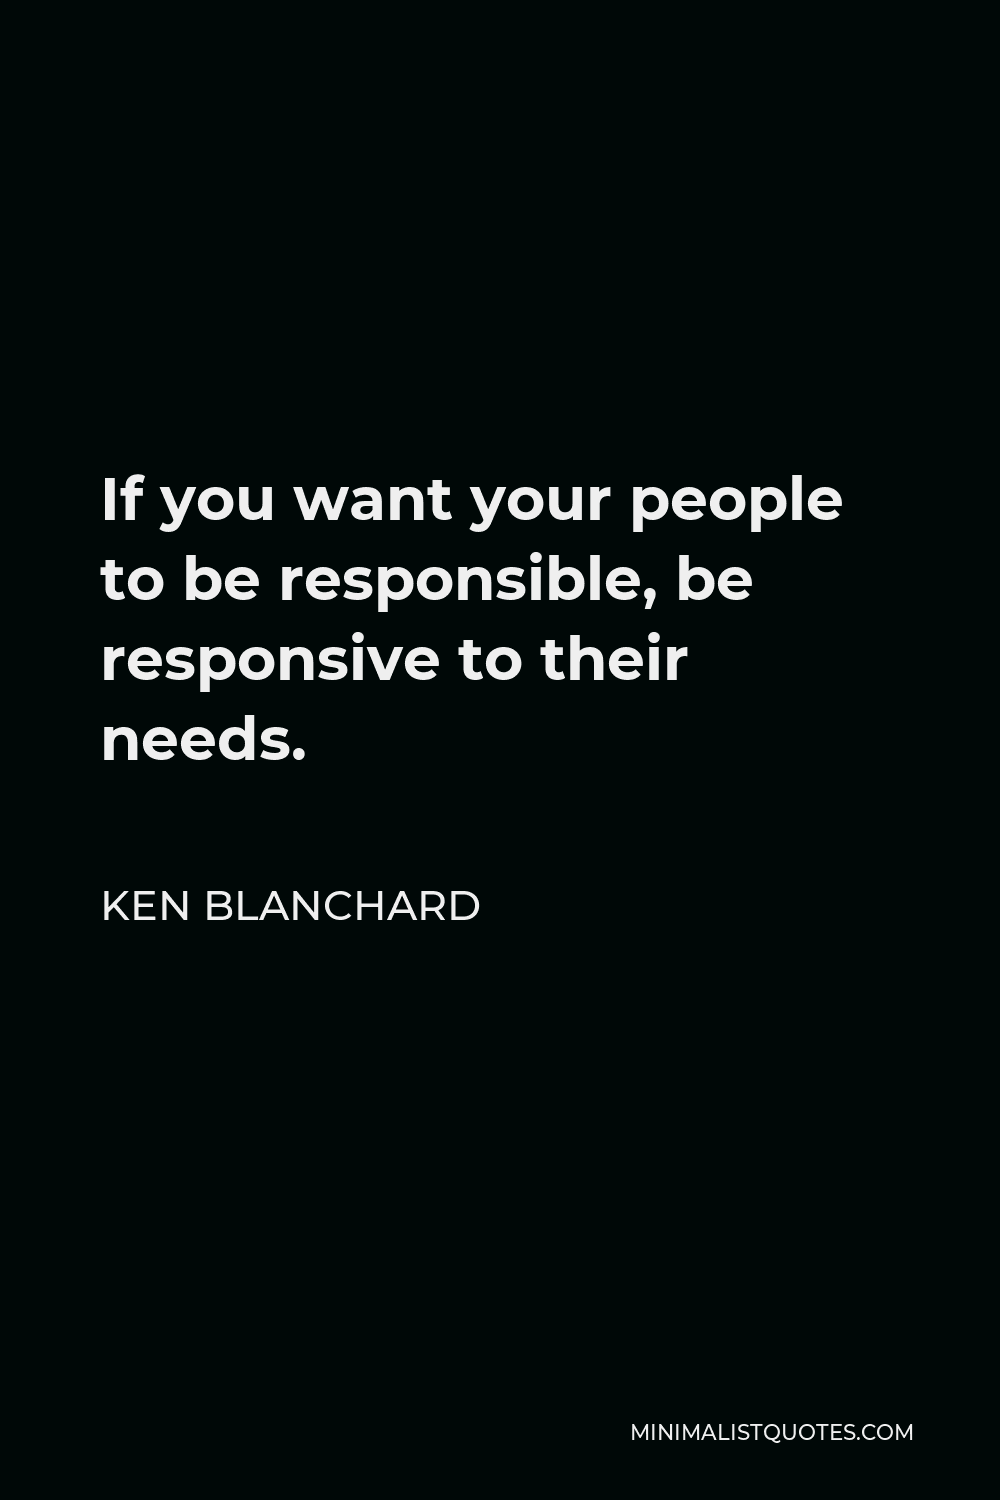 Ken Blanchard Quote - If you want your people to be responsible, be responsive to their needs.